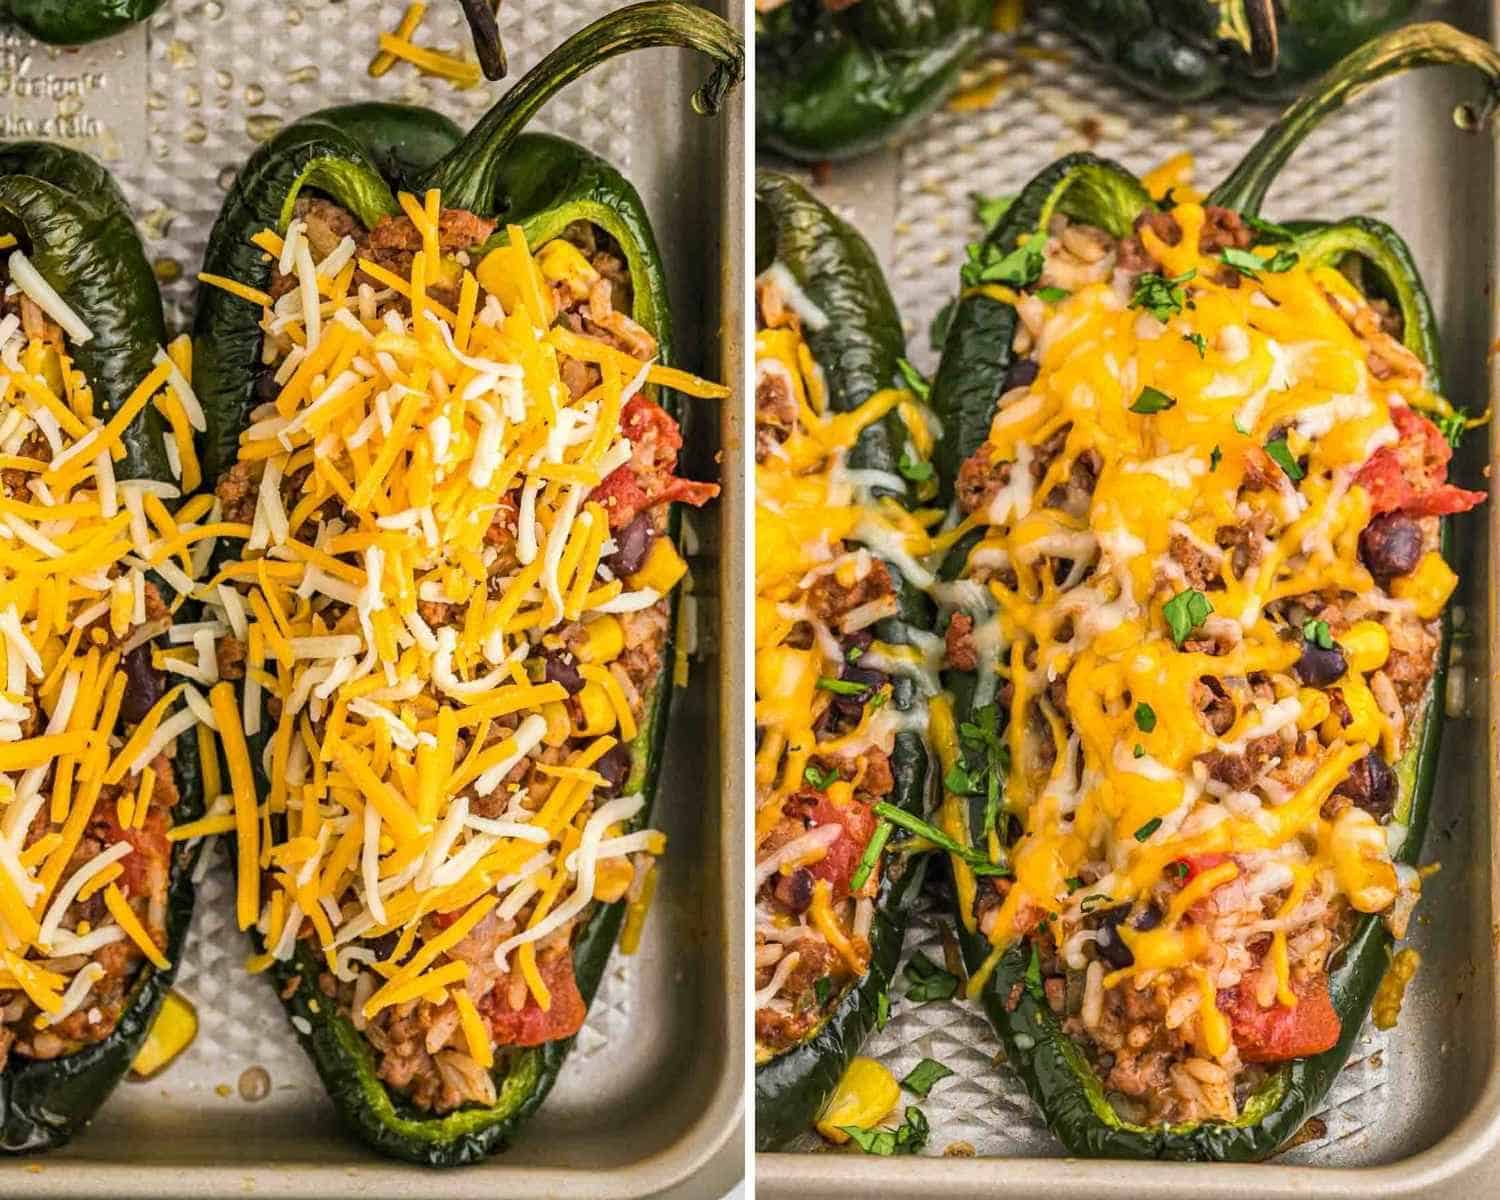 Collage of two images of stuffed poblanos with cheese, before and after baking.